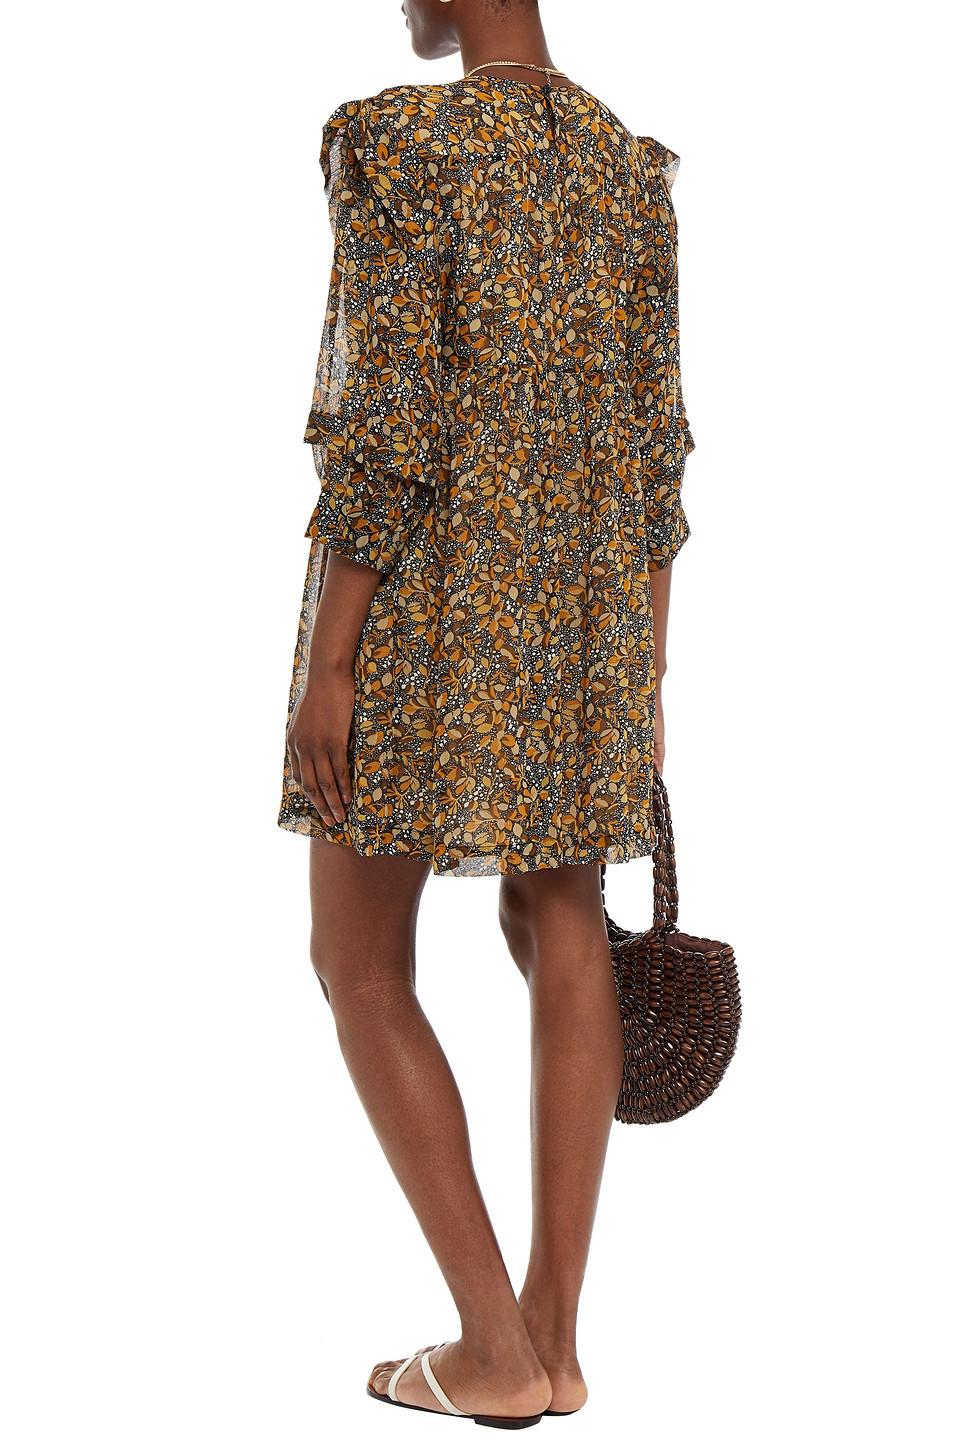 Ba&sh Synthetic Sandra Ruffle-trimmed Printed Georgette Mini Dress in  Charcoal (Brown) - Lyst